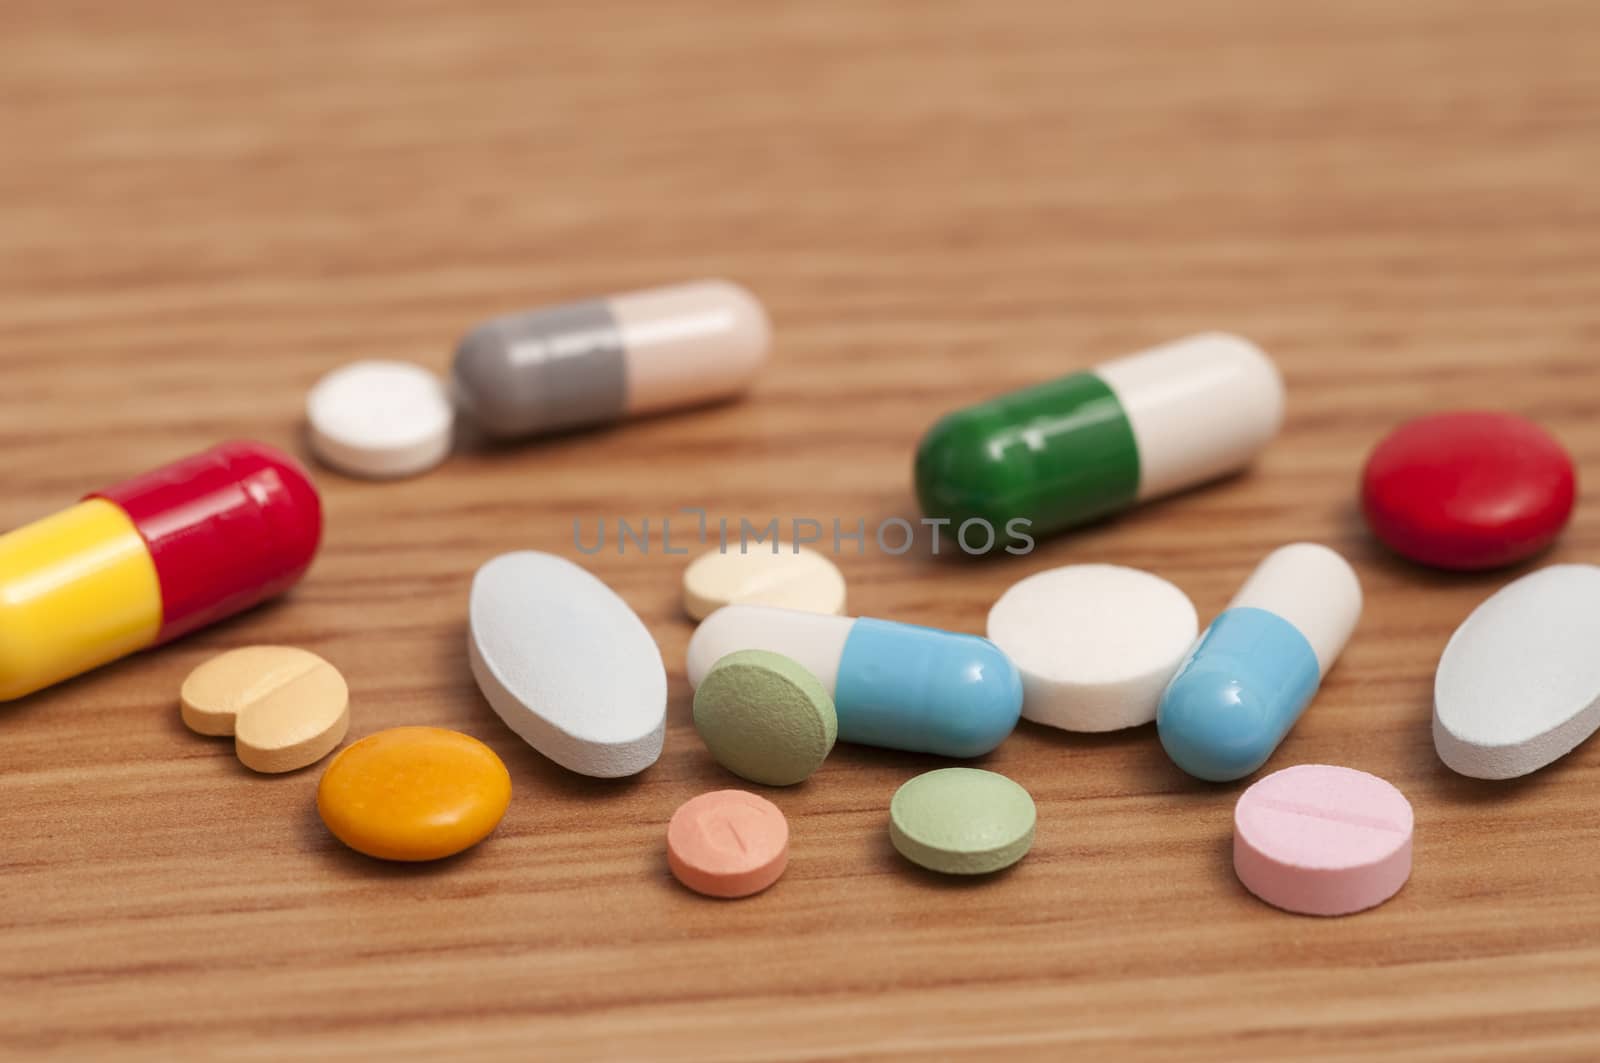 Some capsules and pills on the table